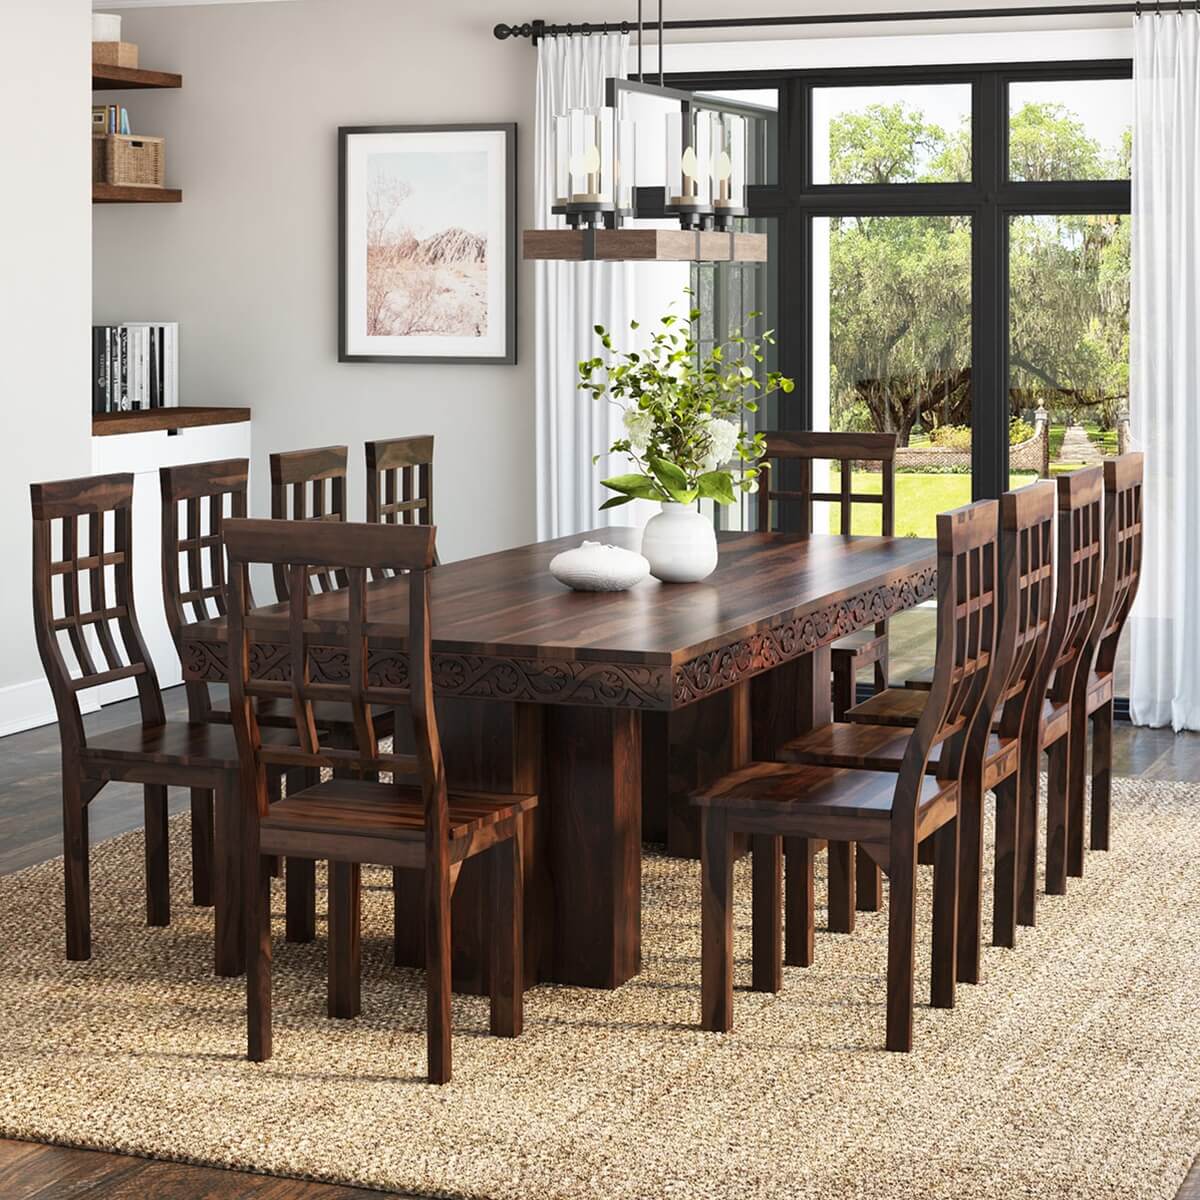 https://www.sierralivingconcepts.com/images/thumbs/0403037_dallas-ranch-rustic-solid-wood-double-pedestal-dining-table-set.jpeg